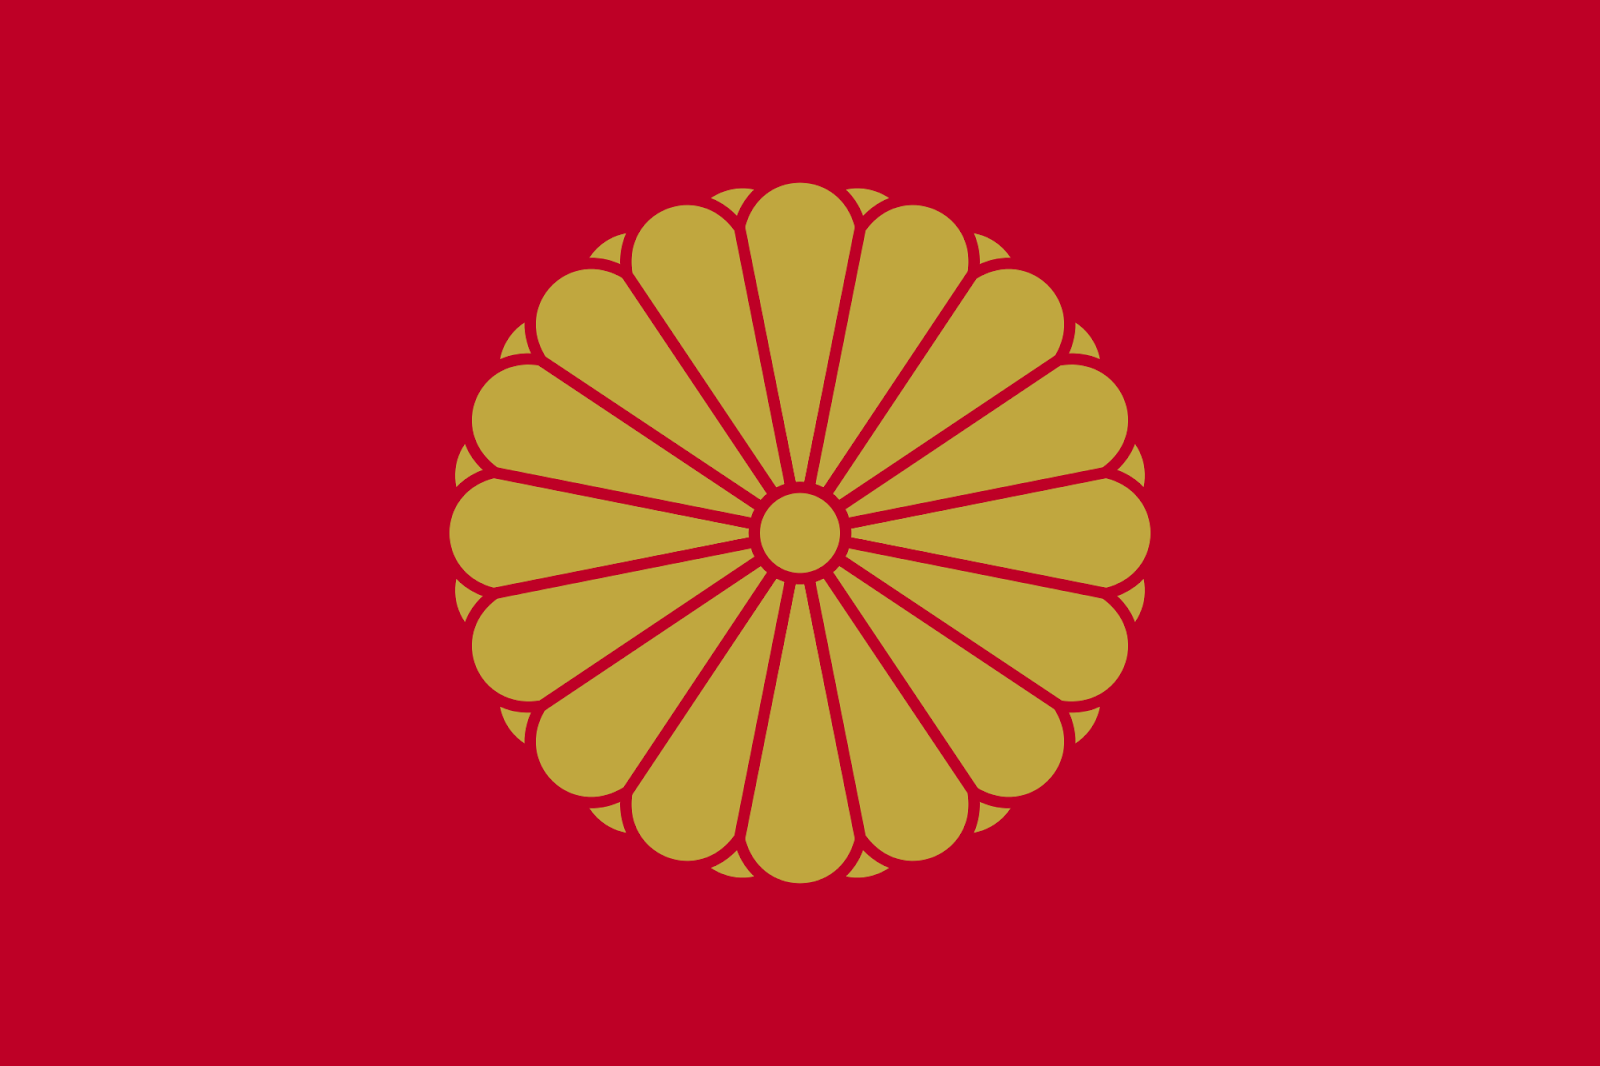 The standard of the Japanese Emperor